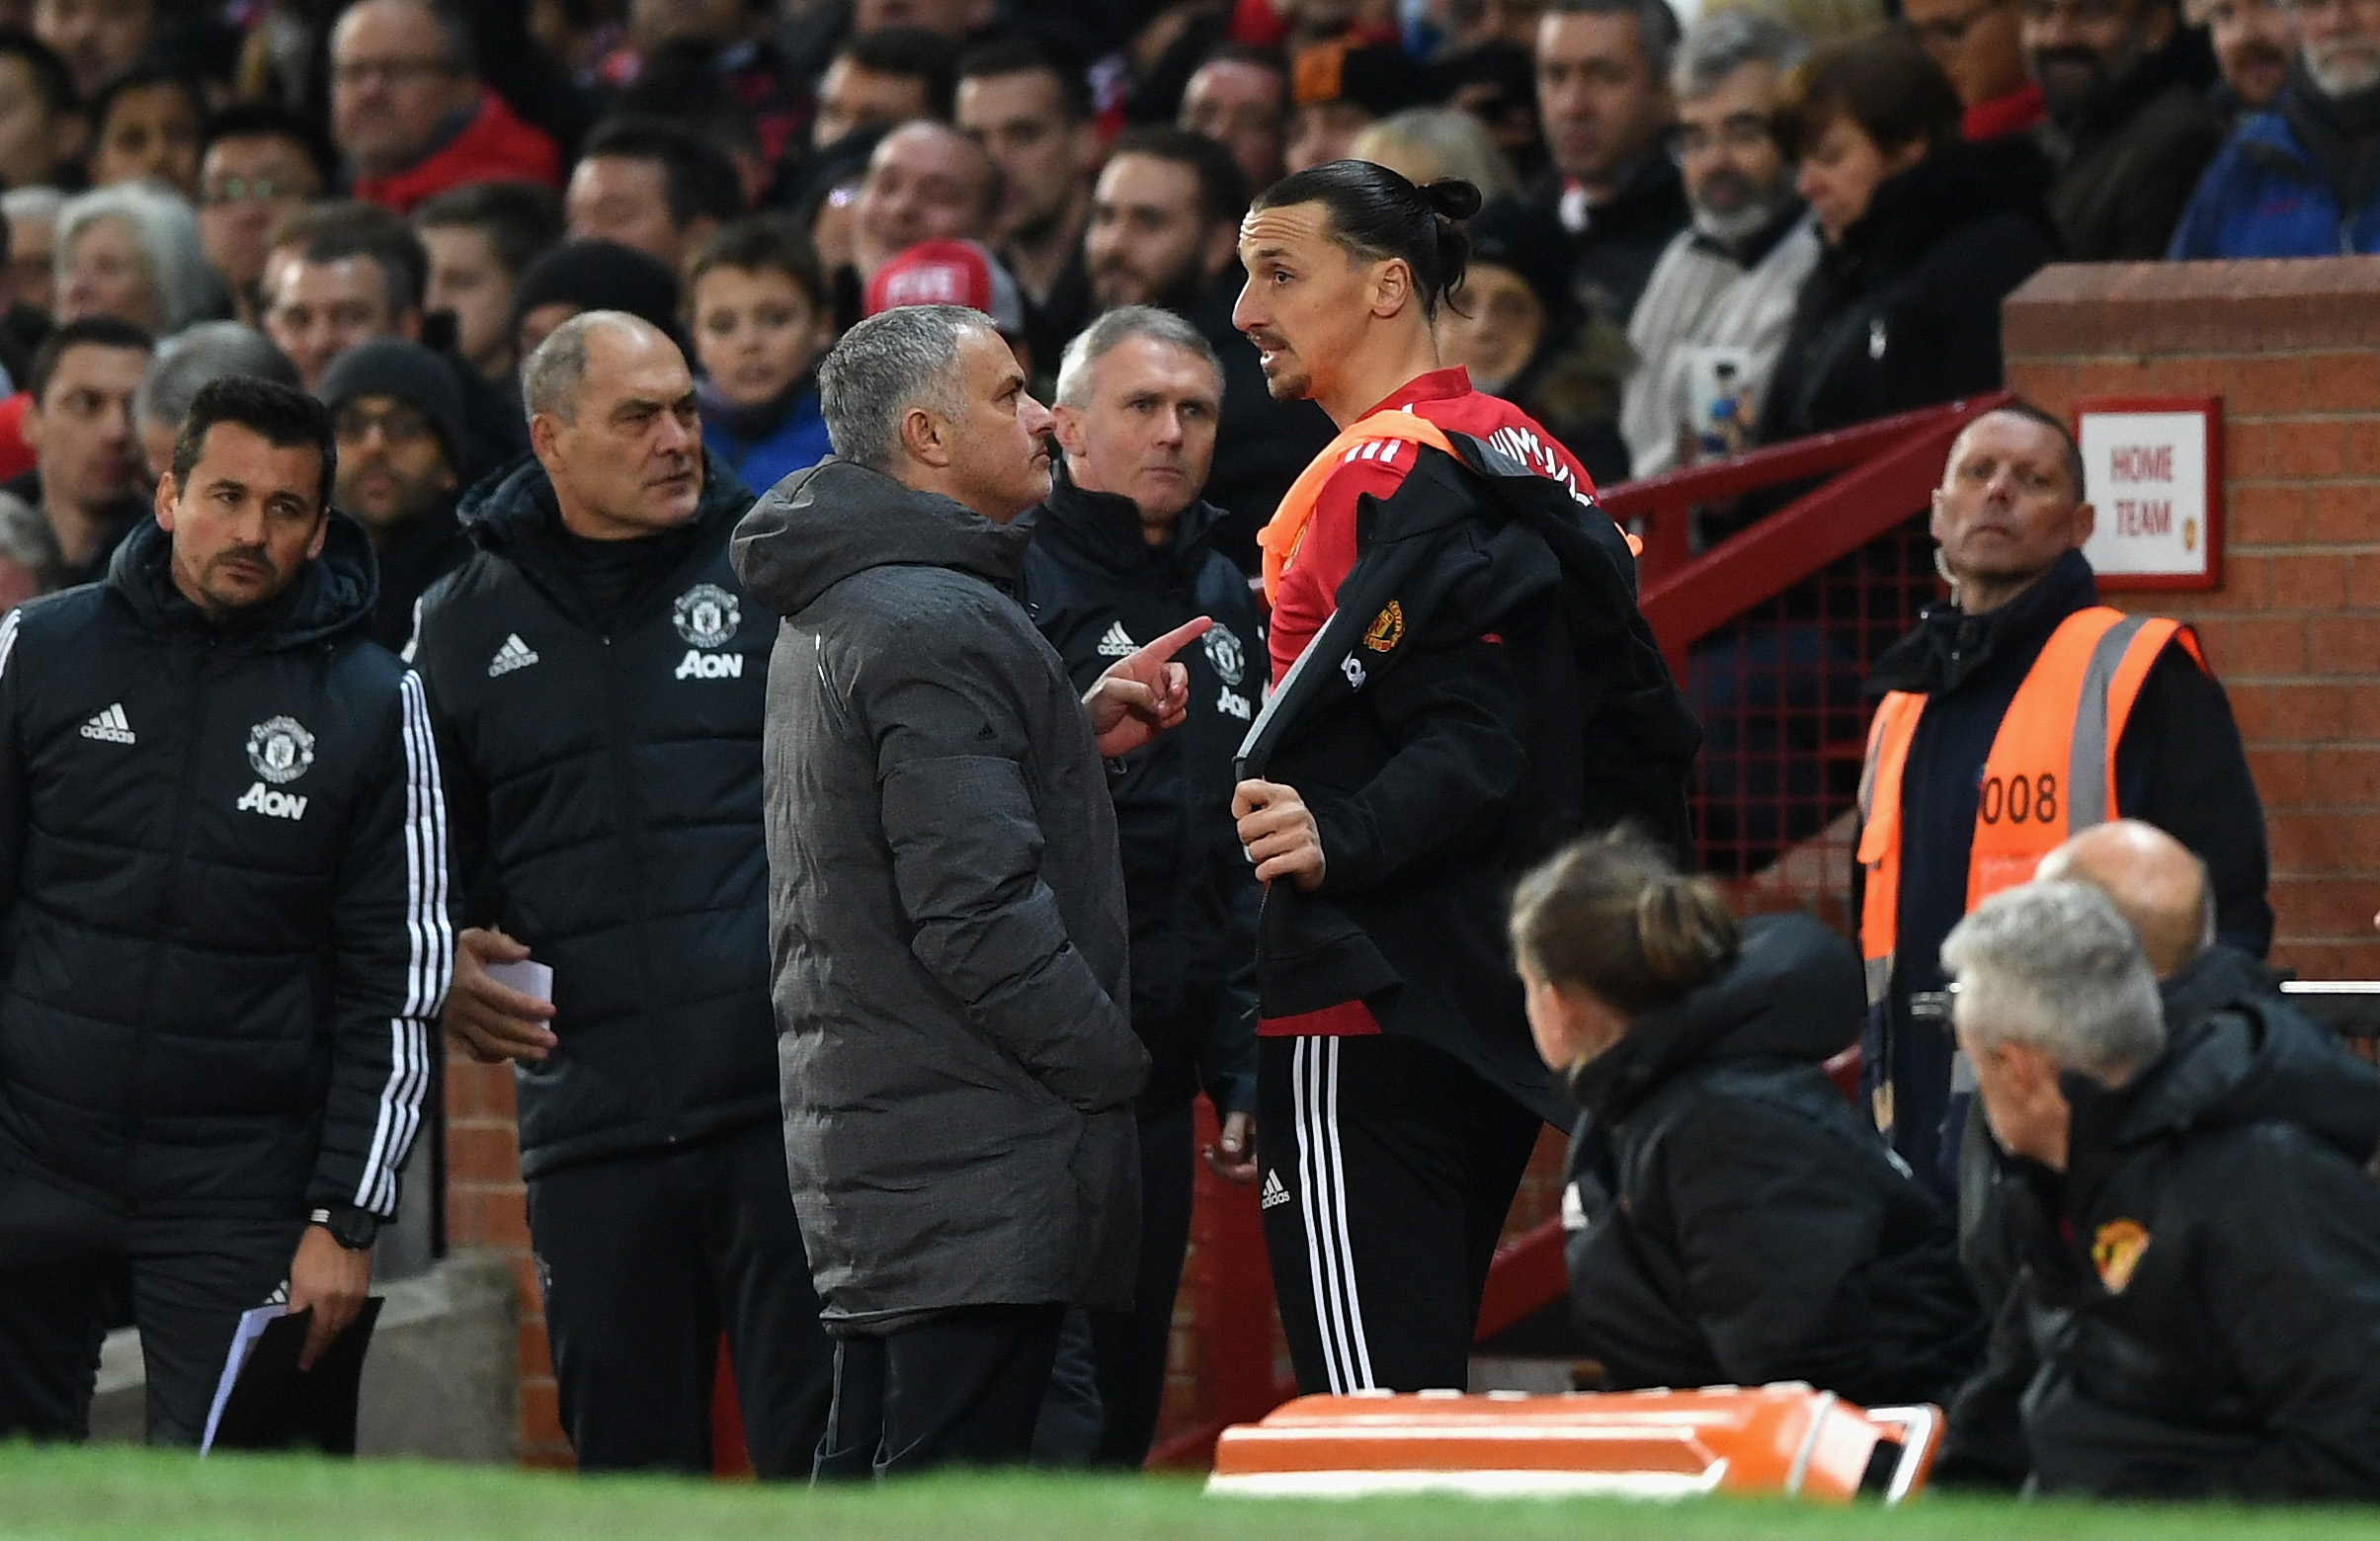 MANCHESTER, ENGLAND - NOVEMBER 18:  Jose Mourinho, Manager of Manchester United instructs Zlatan Ibrahimovic of Manchester United before being substituted during the Premier League match between Manchester United and Newcastle United at Old Trafford on November 18, 2017 in Manchester, England.  (Photo by Gareth Copley/Getty Images)